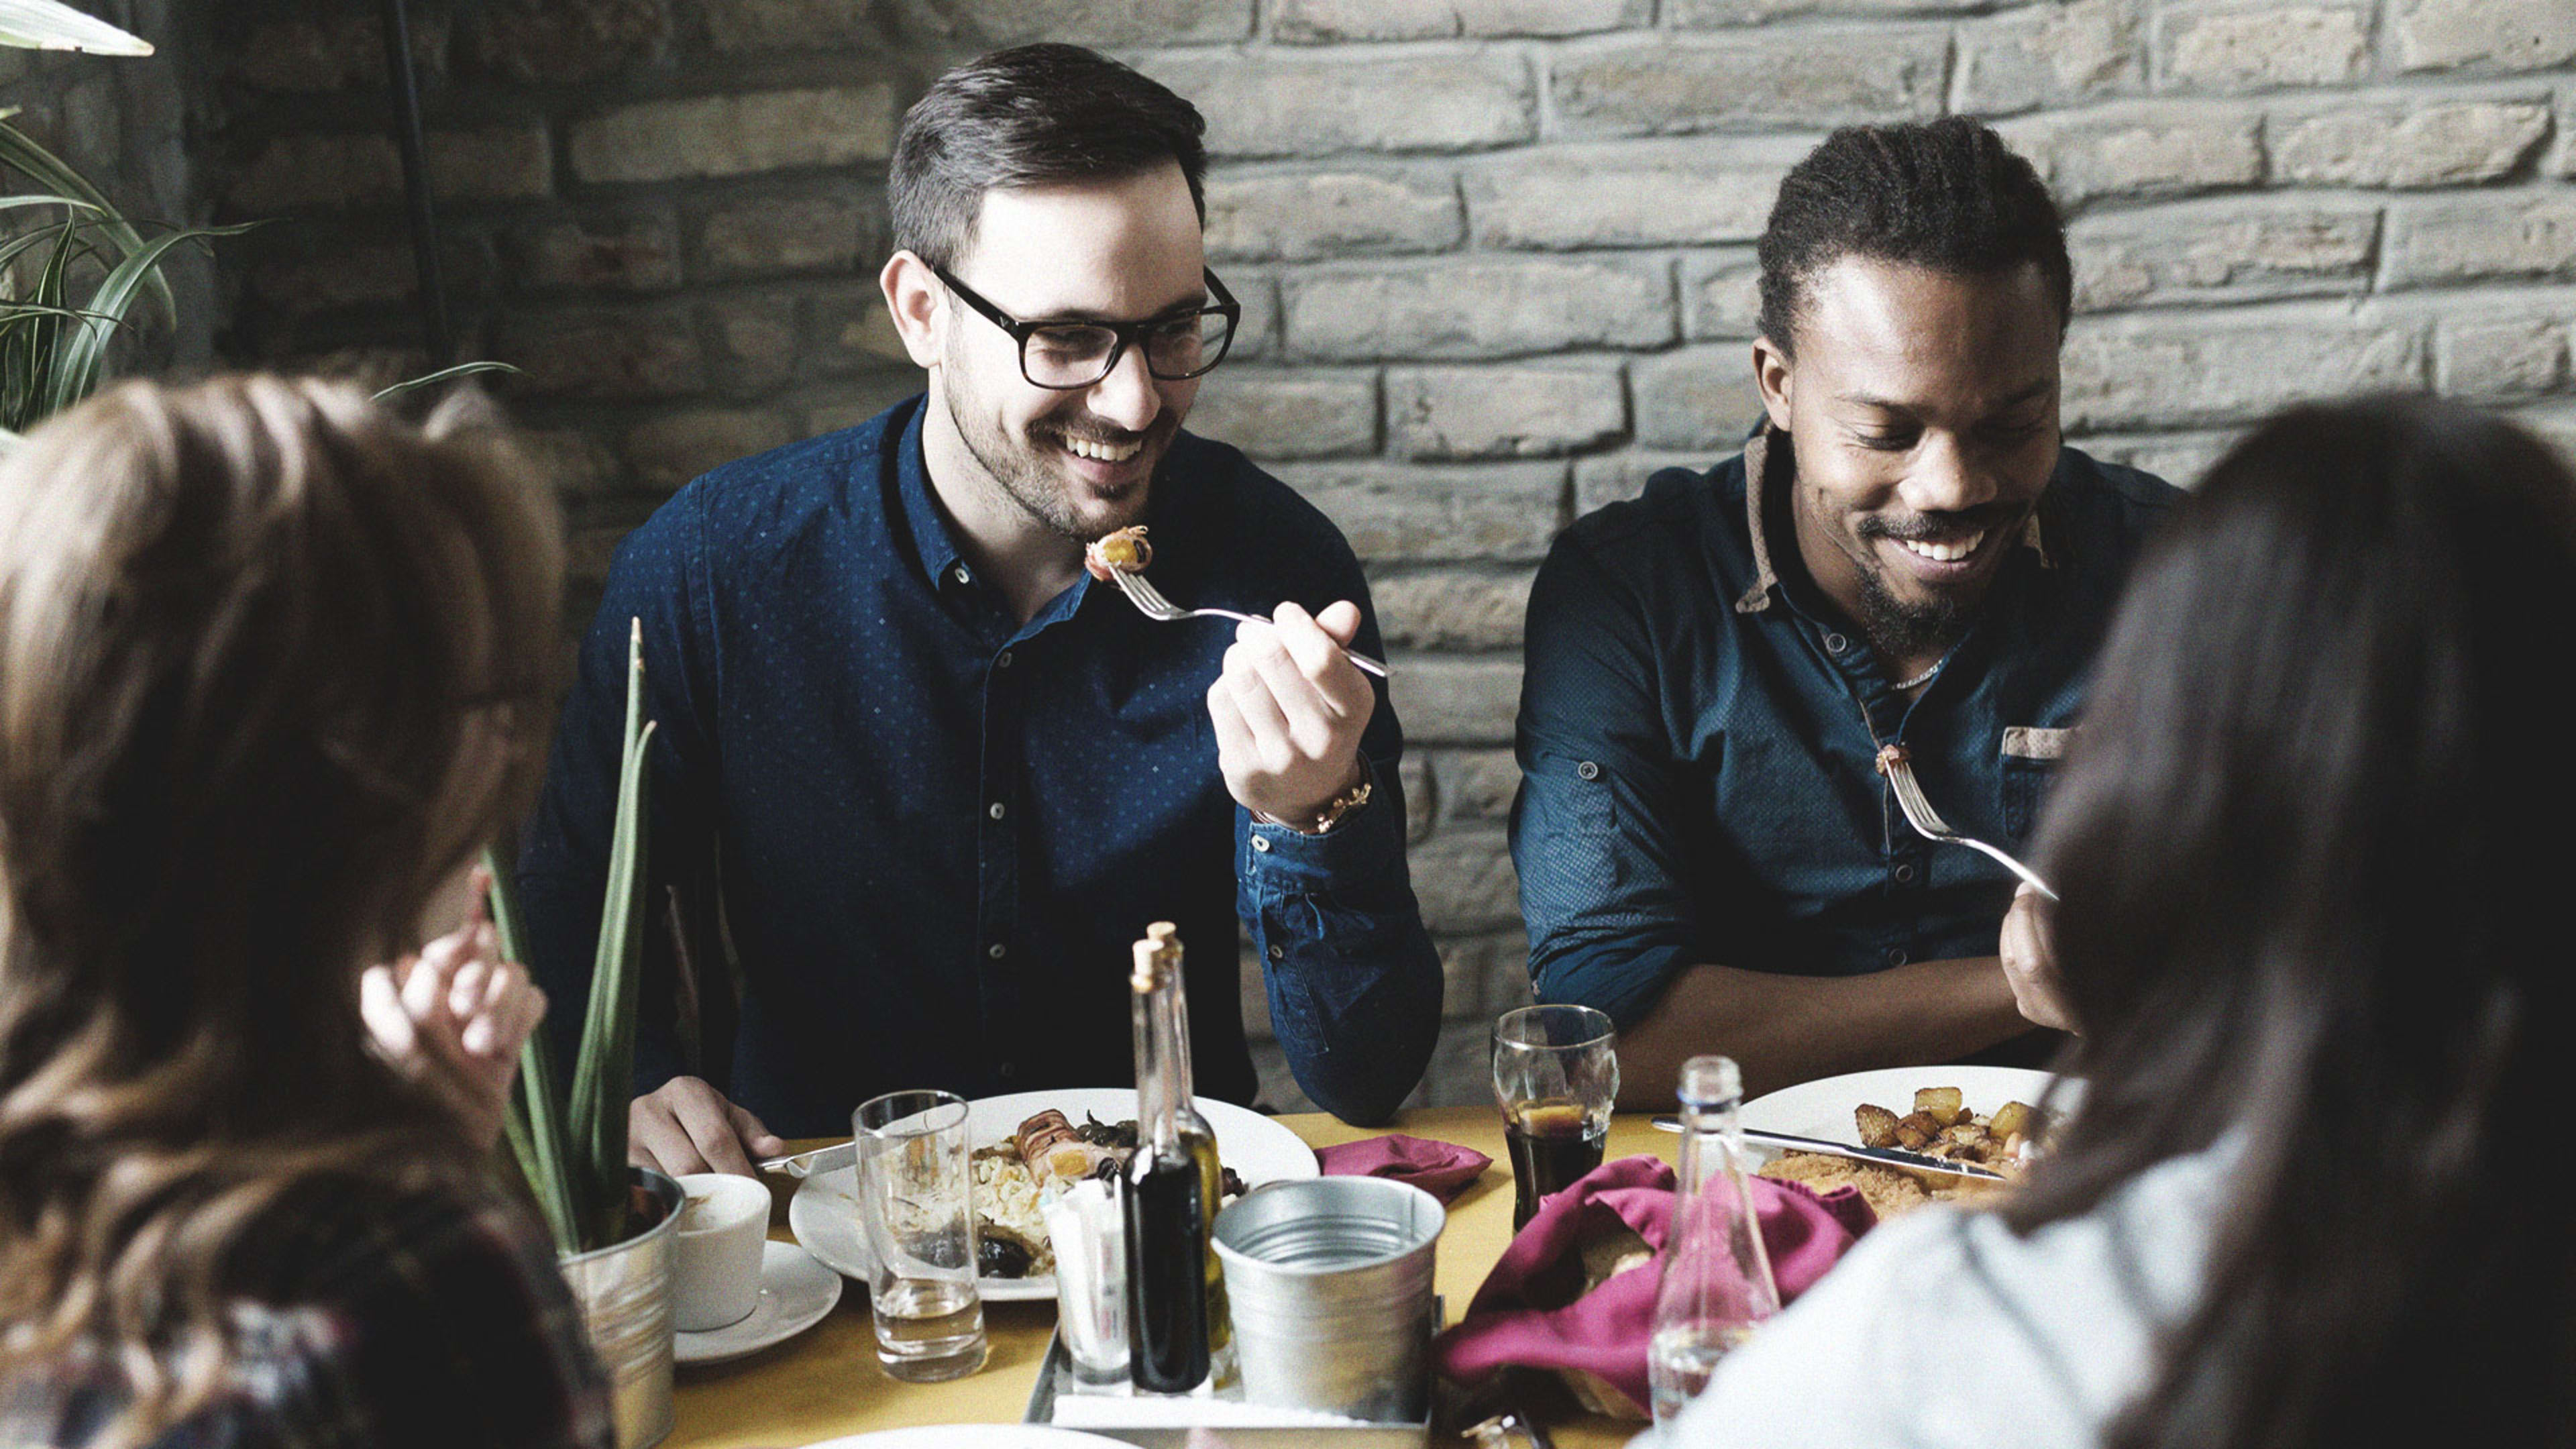 Invited To Lunch With Your Boss’s Boss? Here’s Exactly What To Do